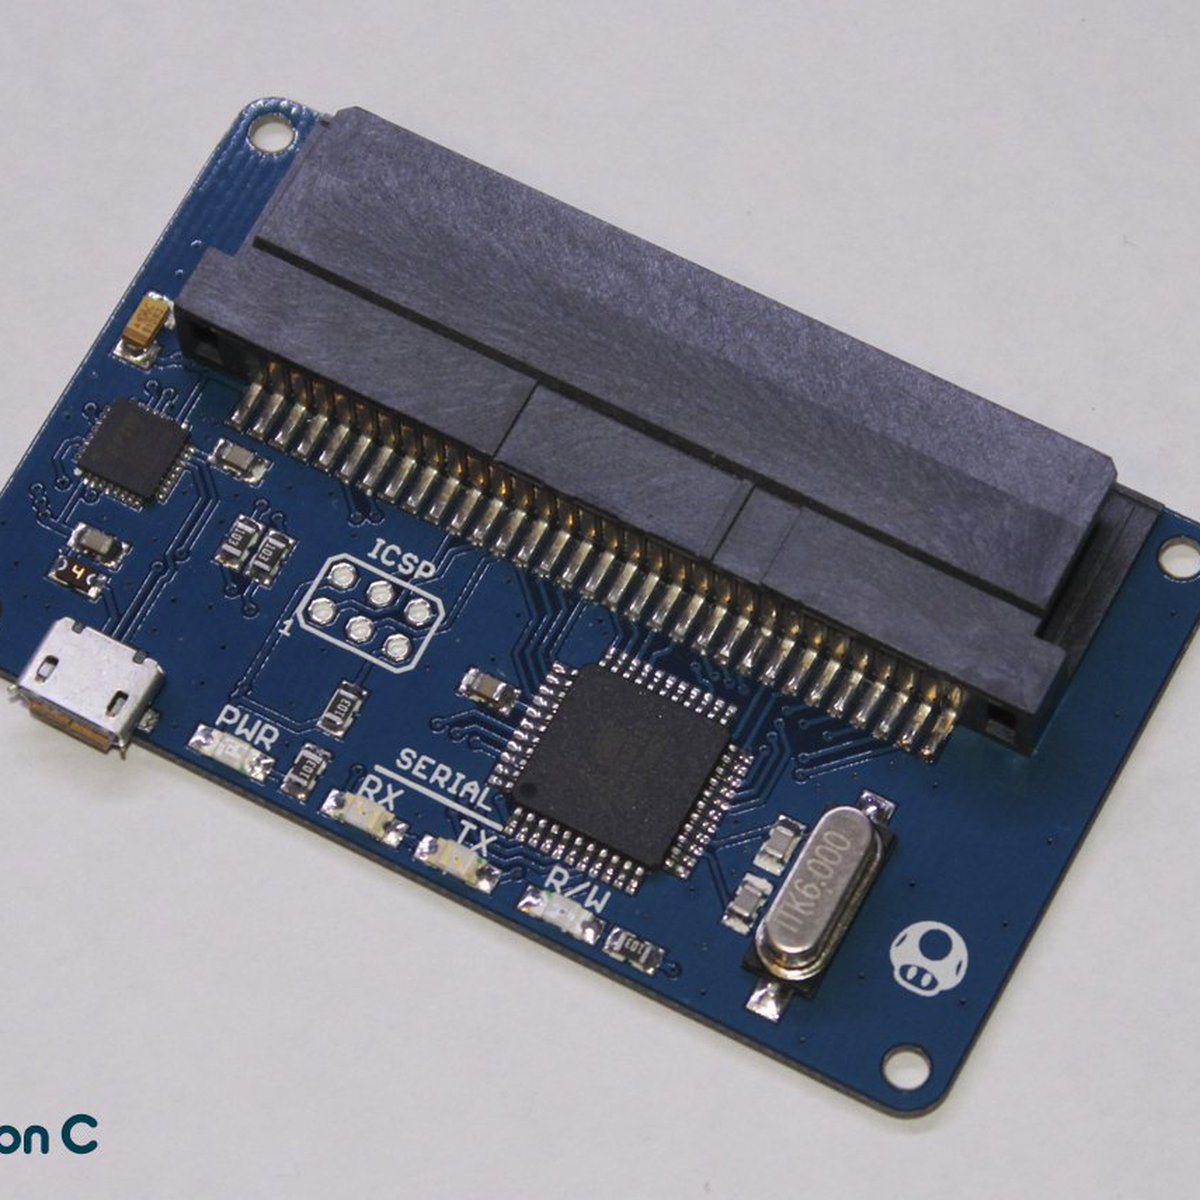 Cart Flasher For Gameboy From J Rodrigo On Tindie